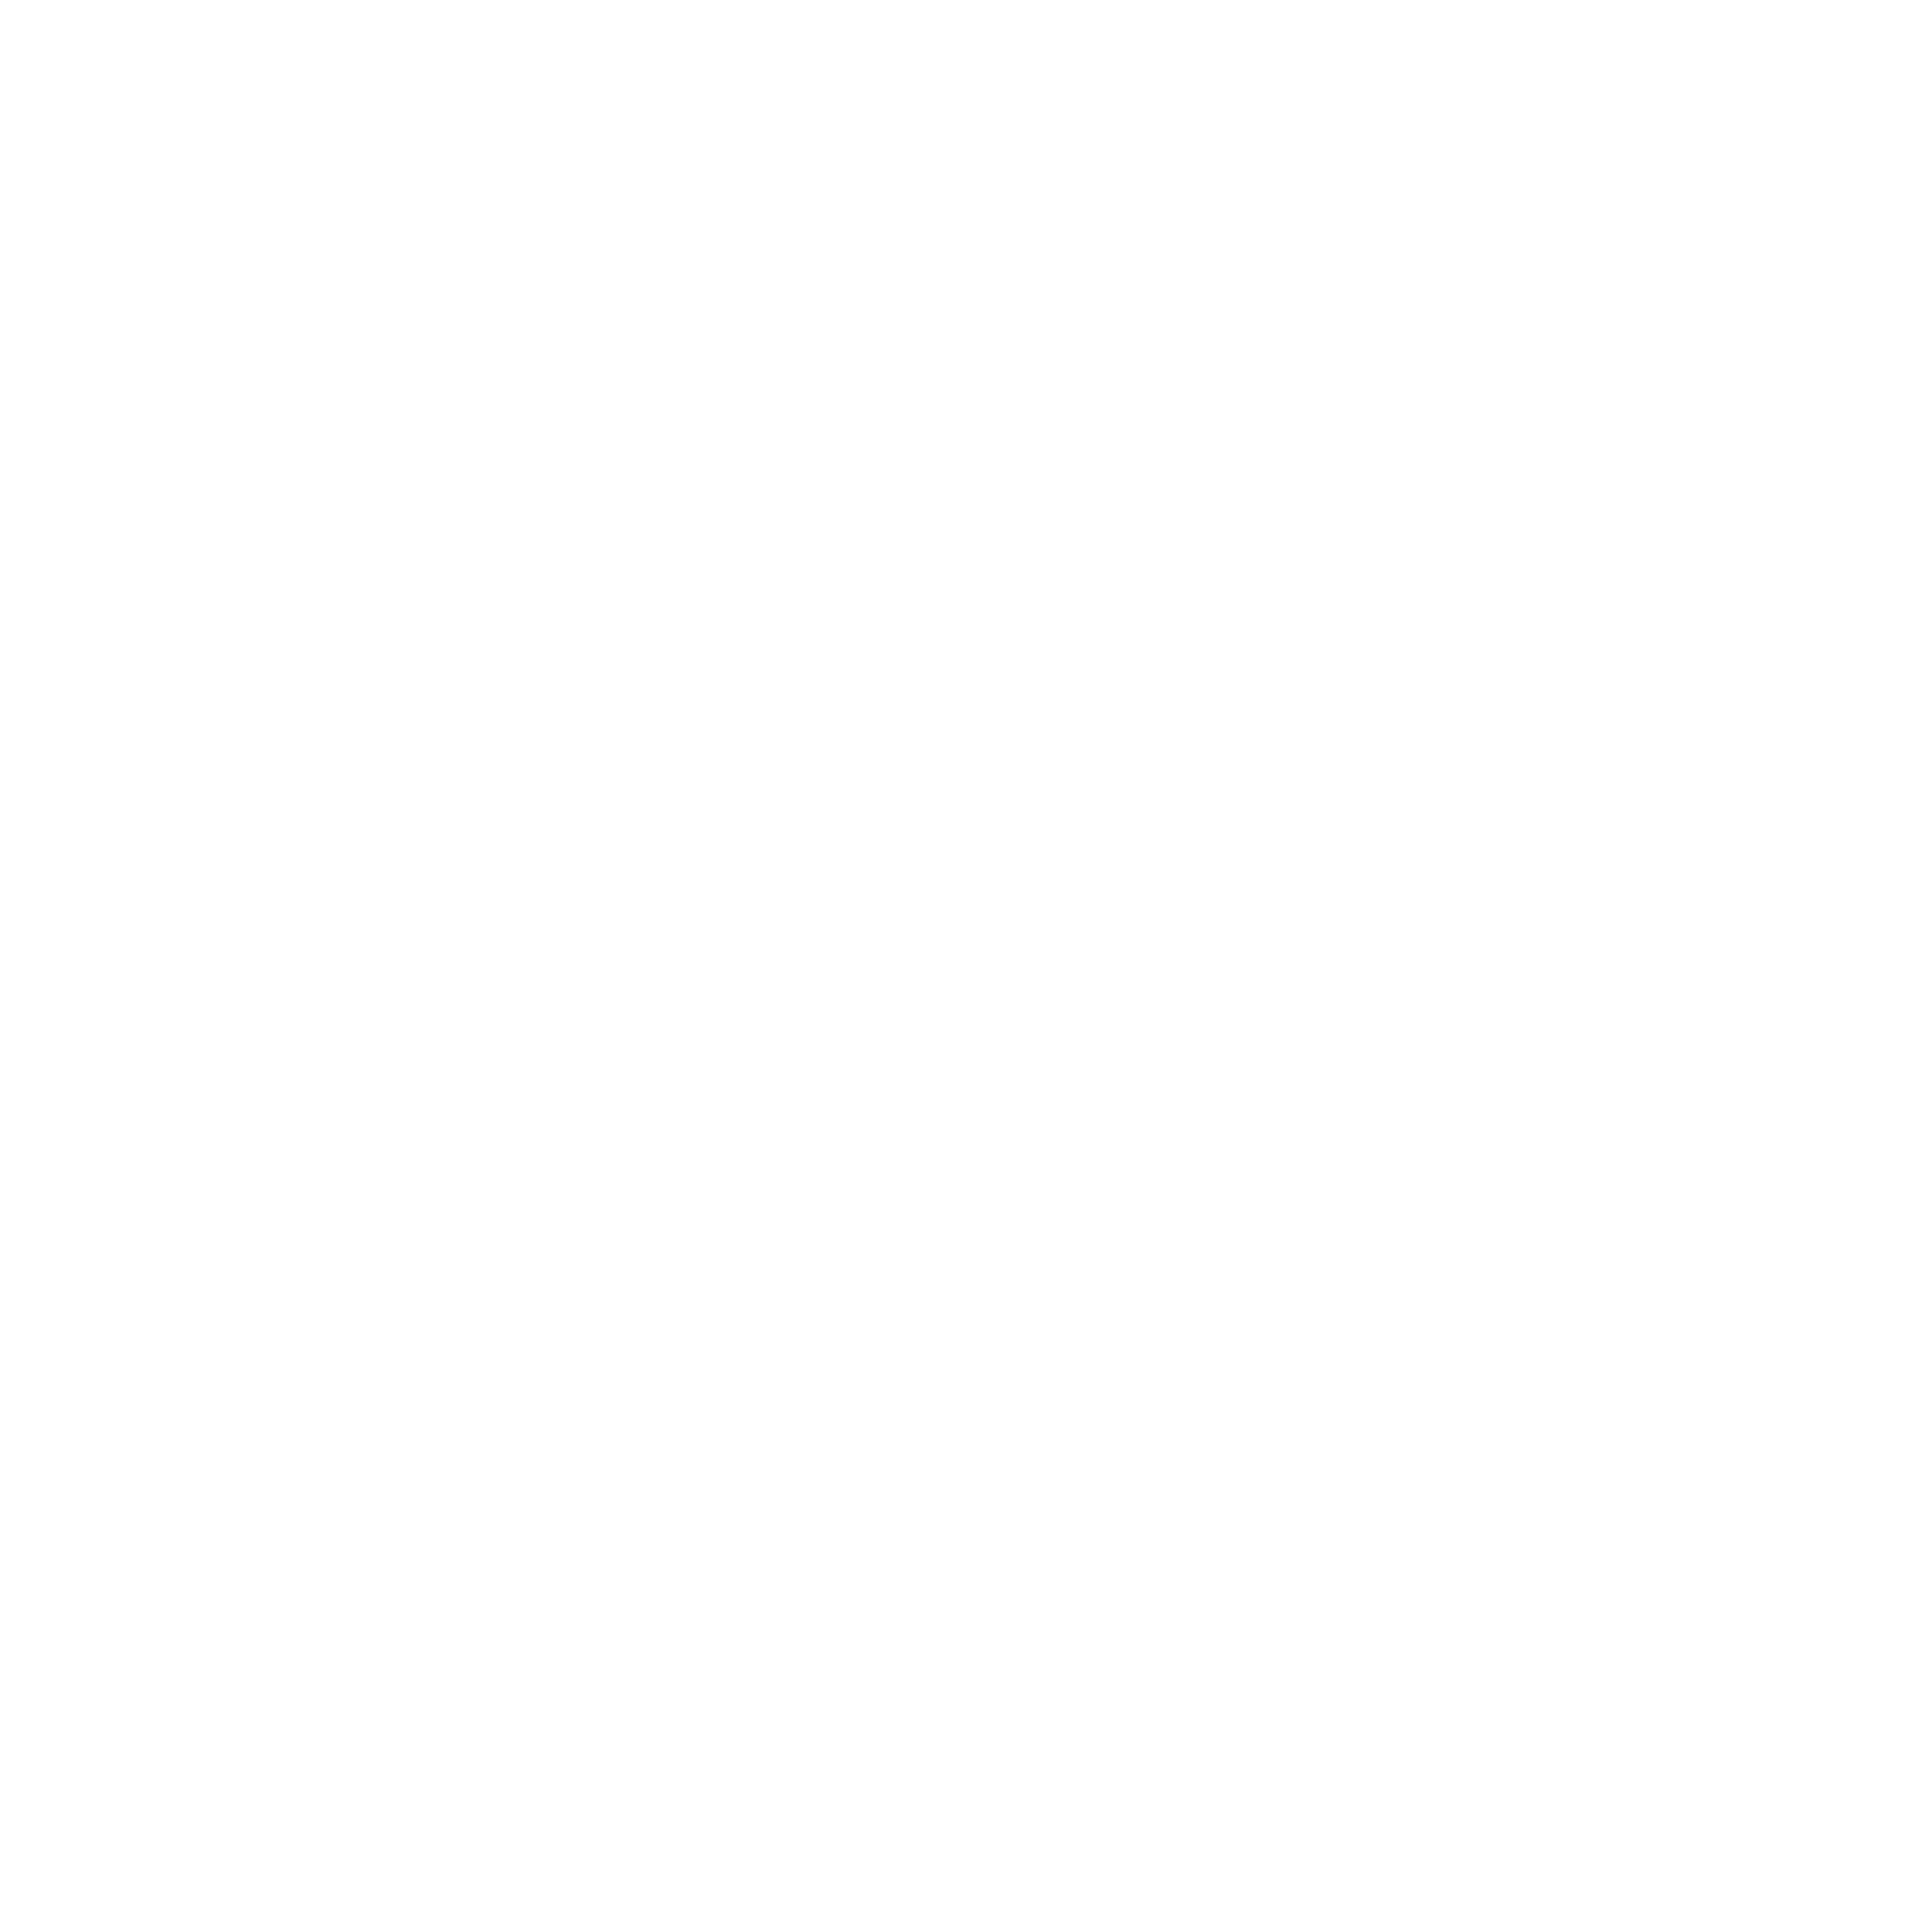 The Coordinated Home